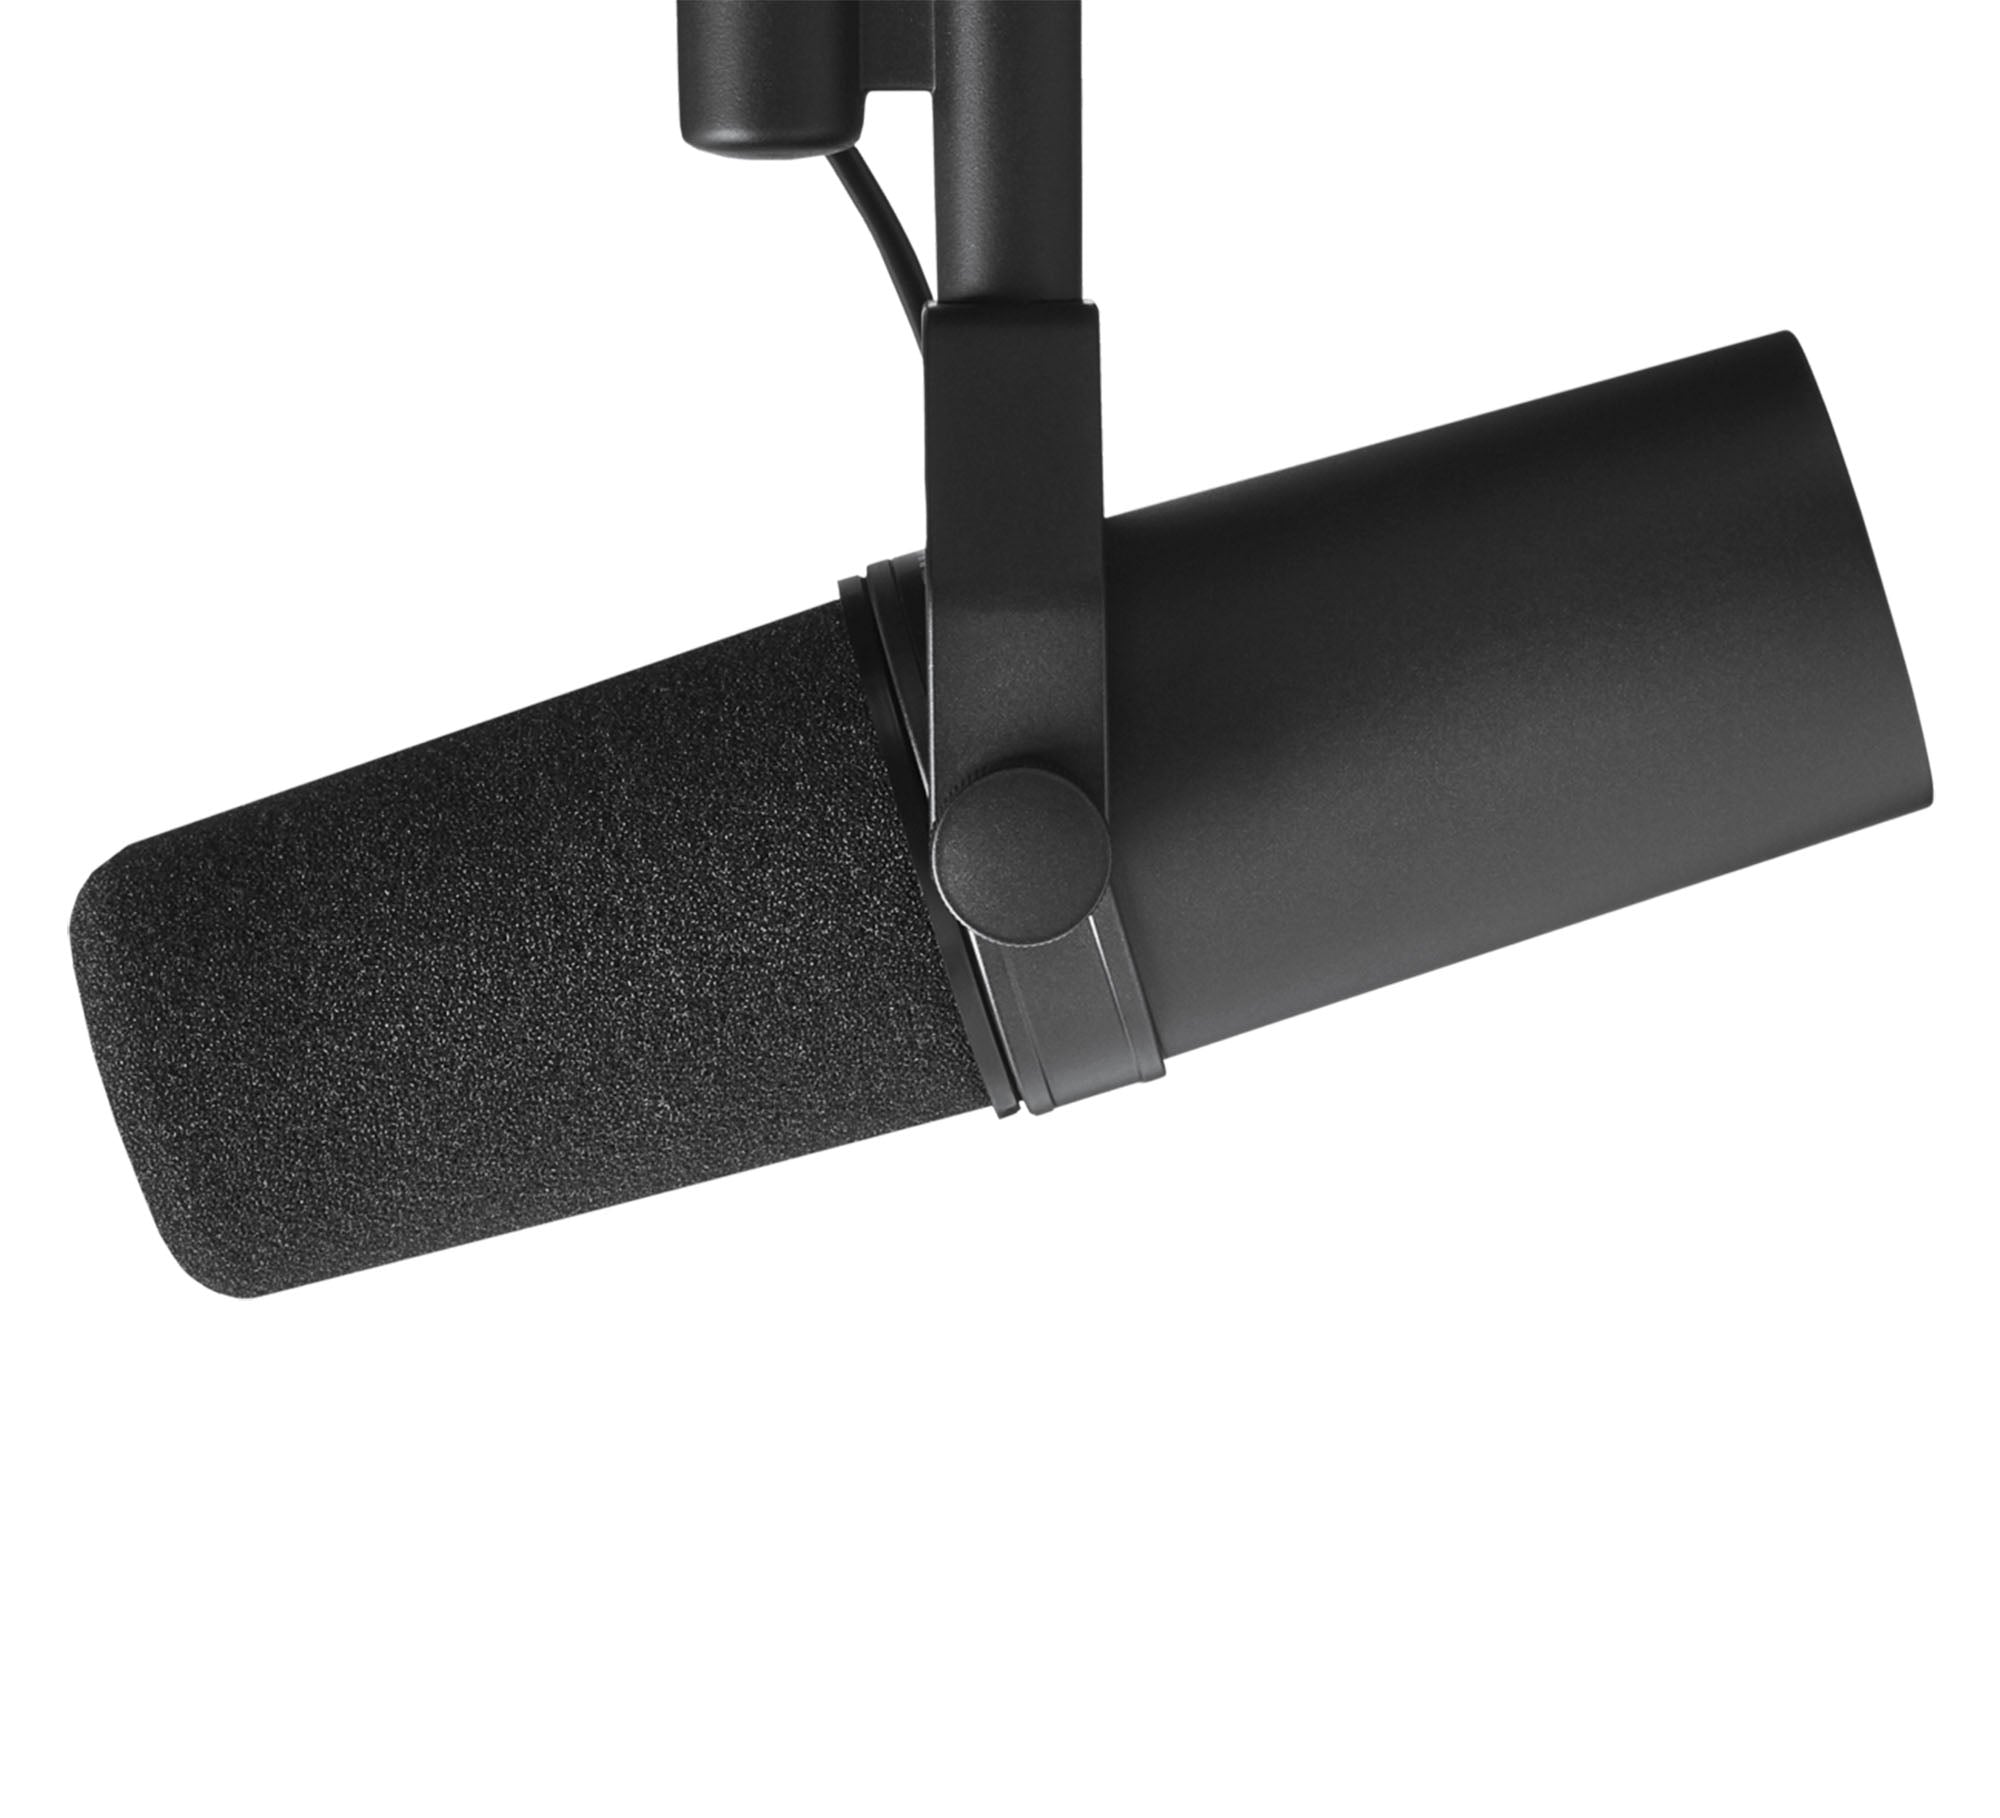 Shure SM7B Professional Podcast Mic - Cardioid Dynamic Studio Vocal Microphone - Hollywood DJ